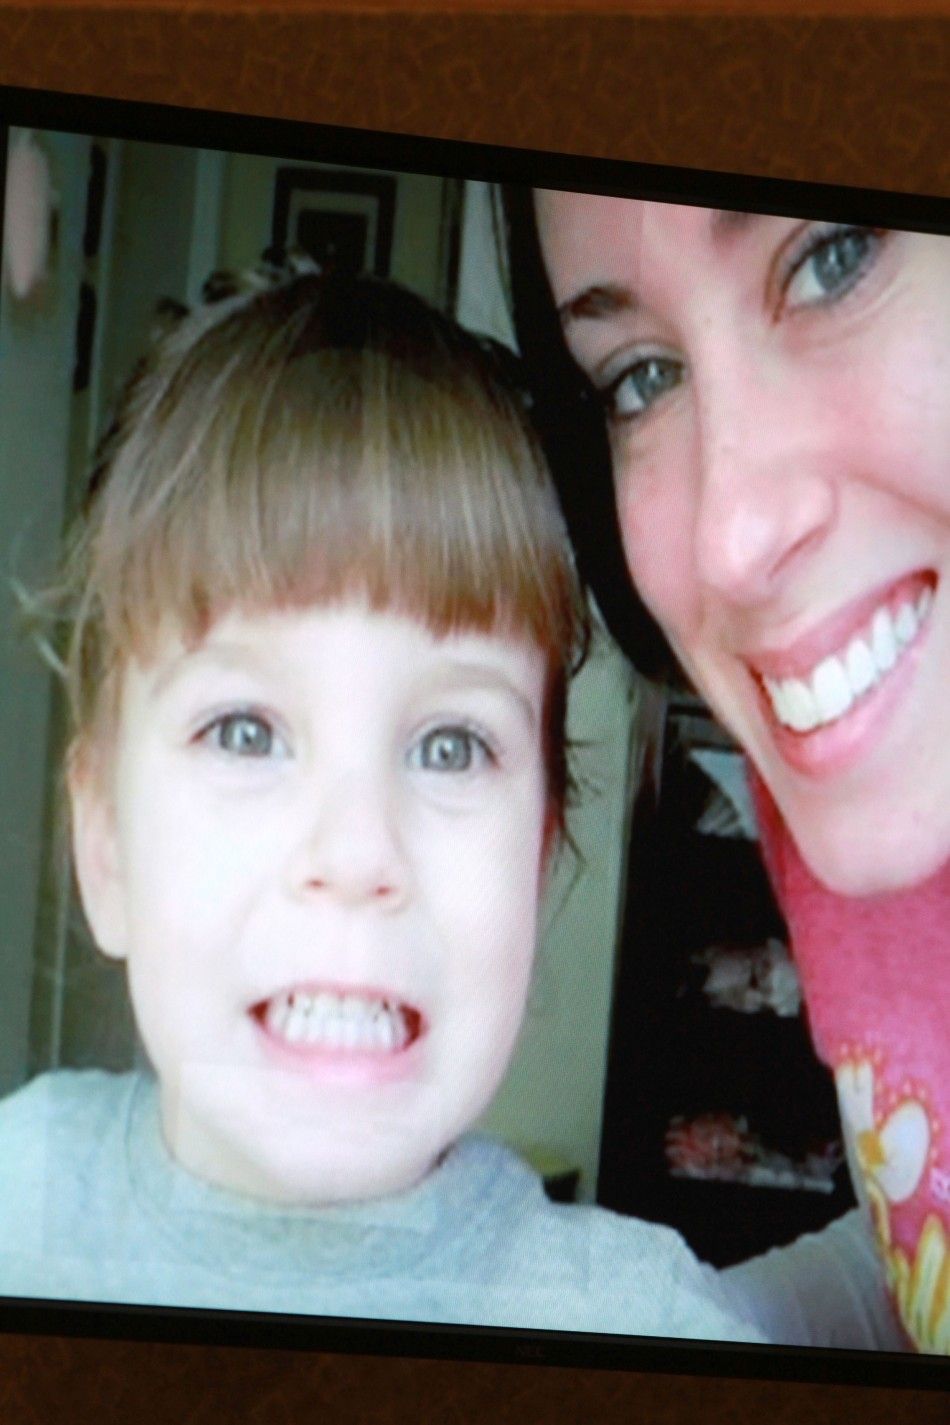 An image of Casey Anthony and her daughter Caylee 